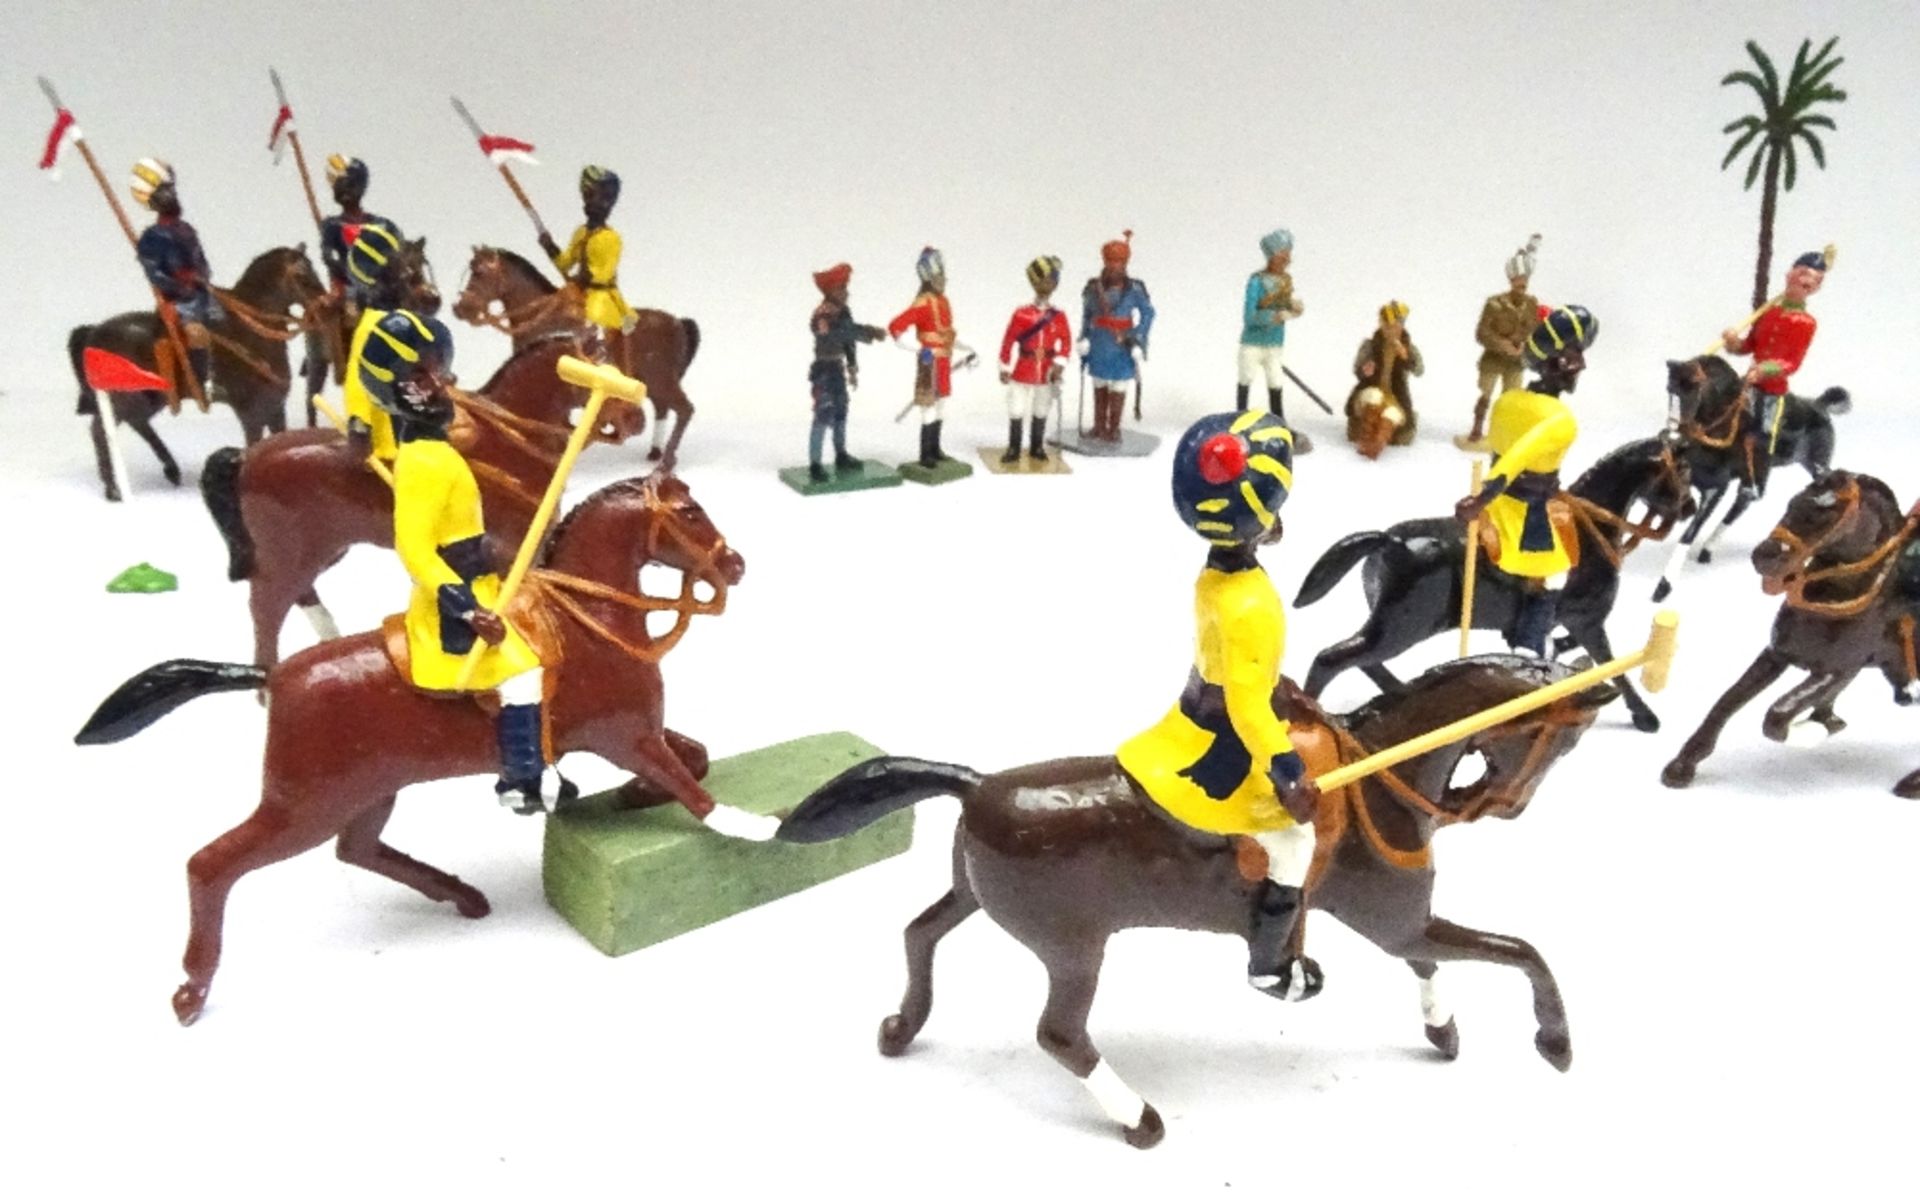 British India, The Polo Game - Image 5 of 5